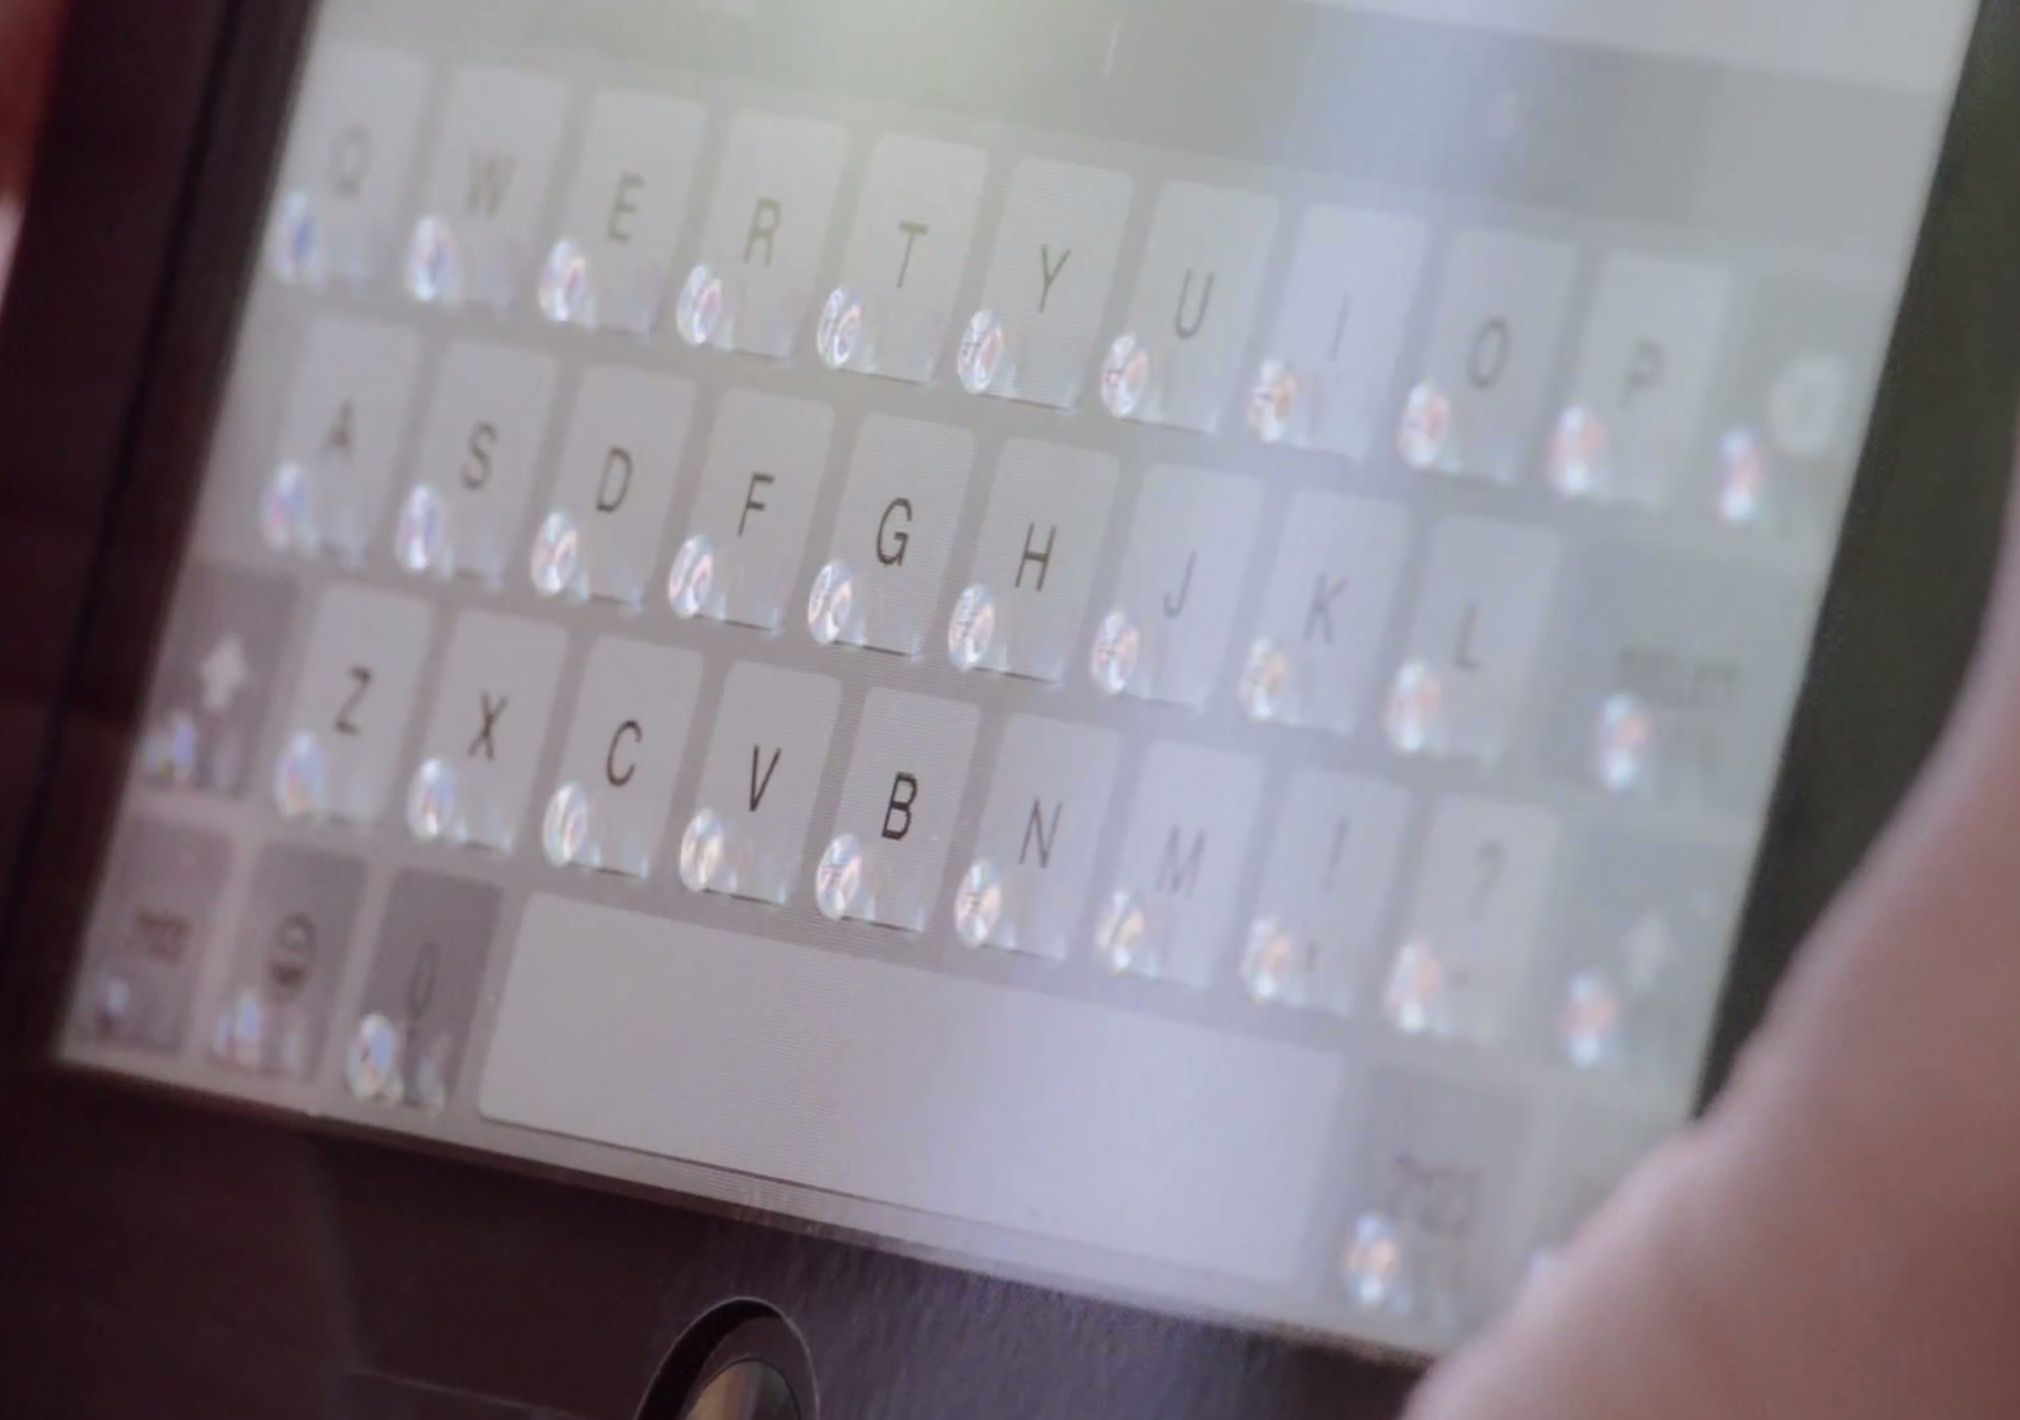 tactus phorm case magically makes physical keyboard bubbles appear on your ipad mini screen image 1